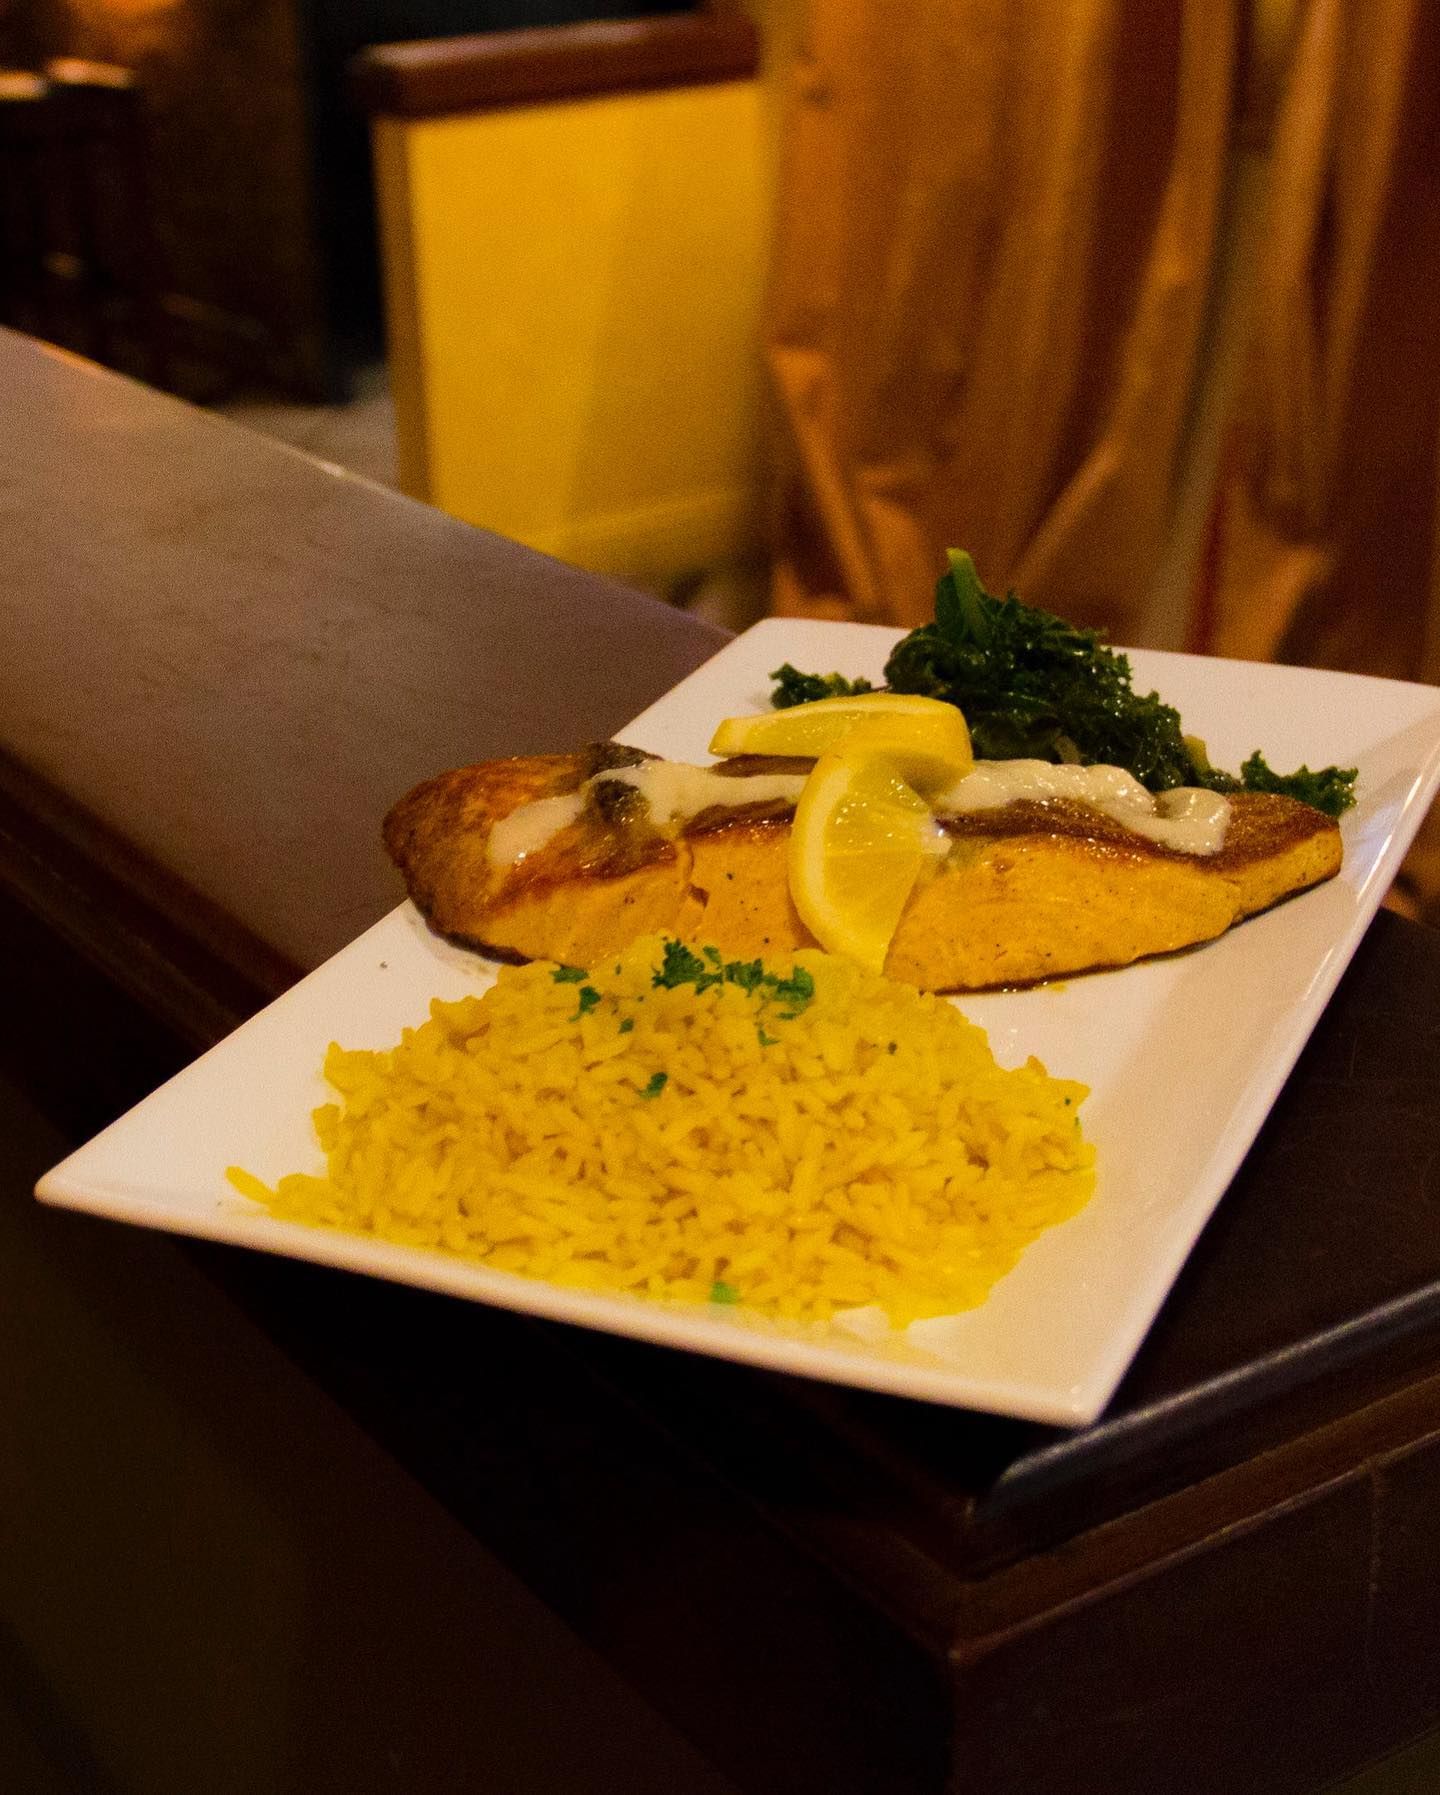 Delicious Salmon Dishes at Our Mediterranean Restaurant